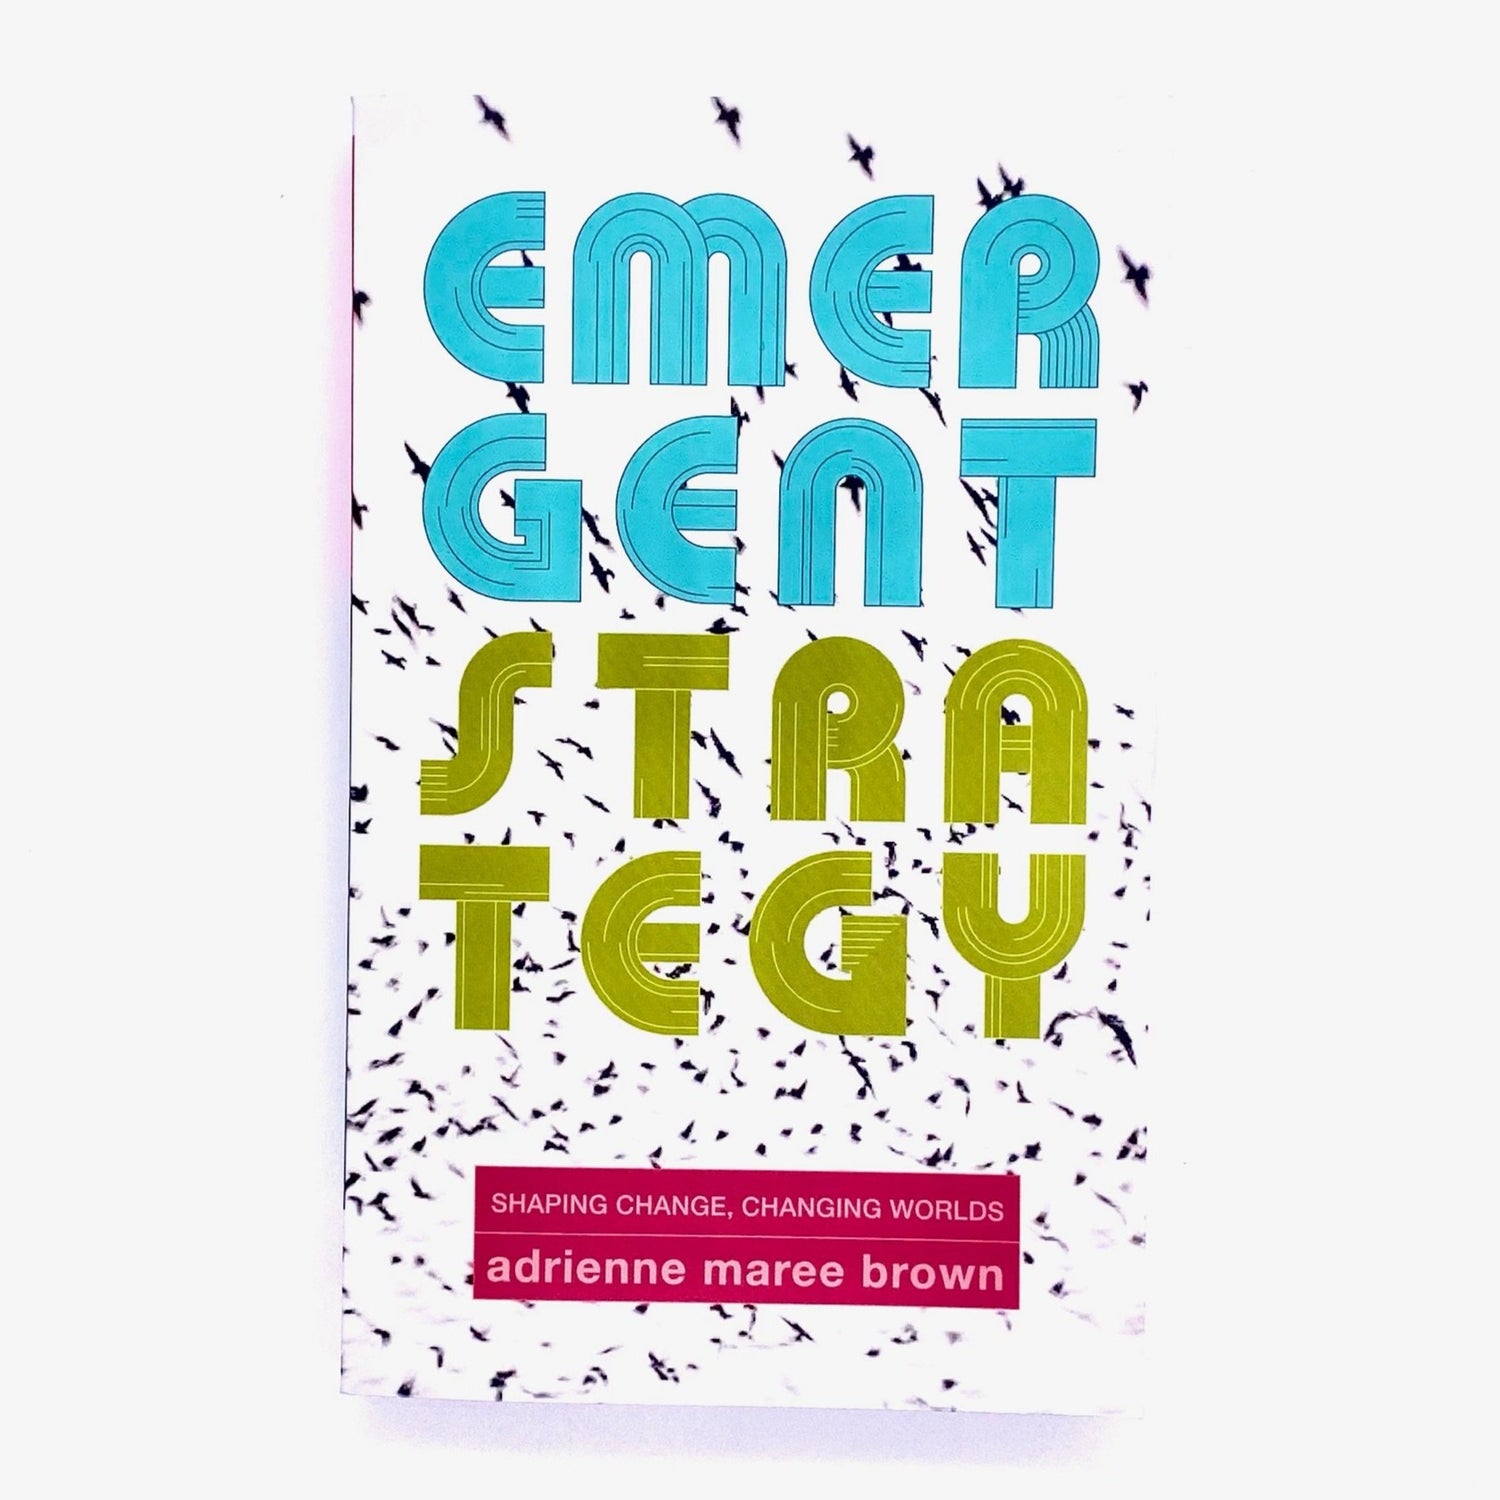 Cover of Emergent Strategy by Adrienne Maree Brown.